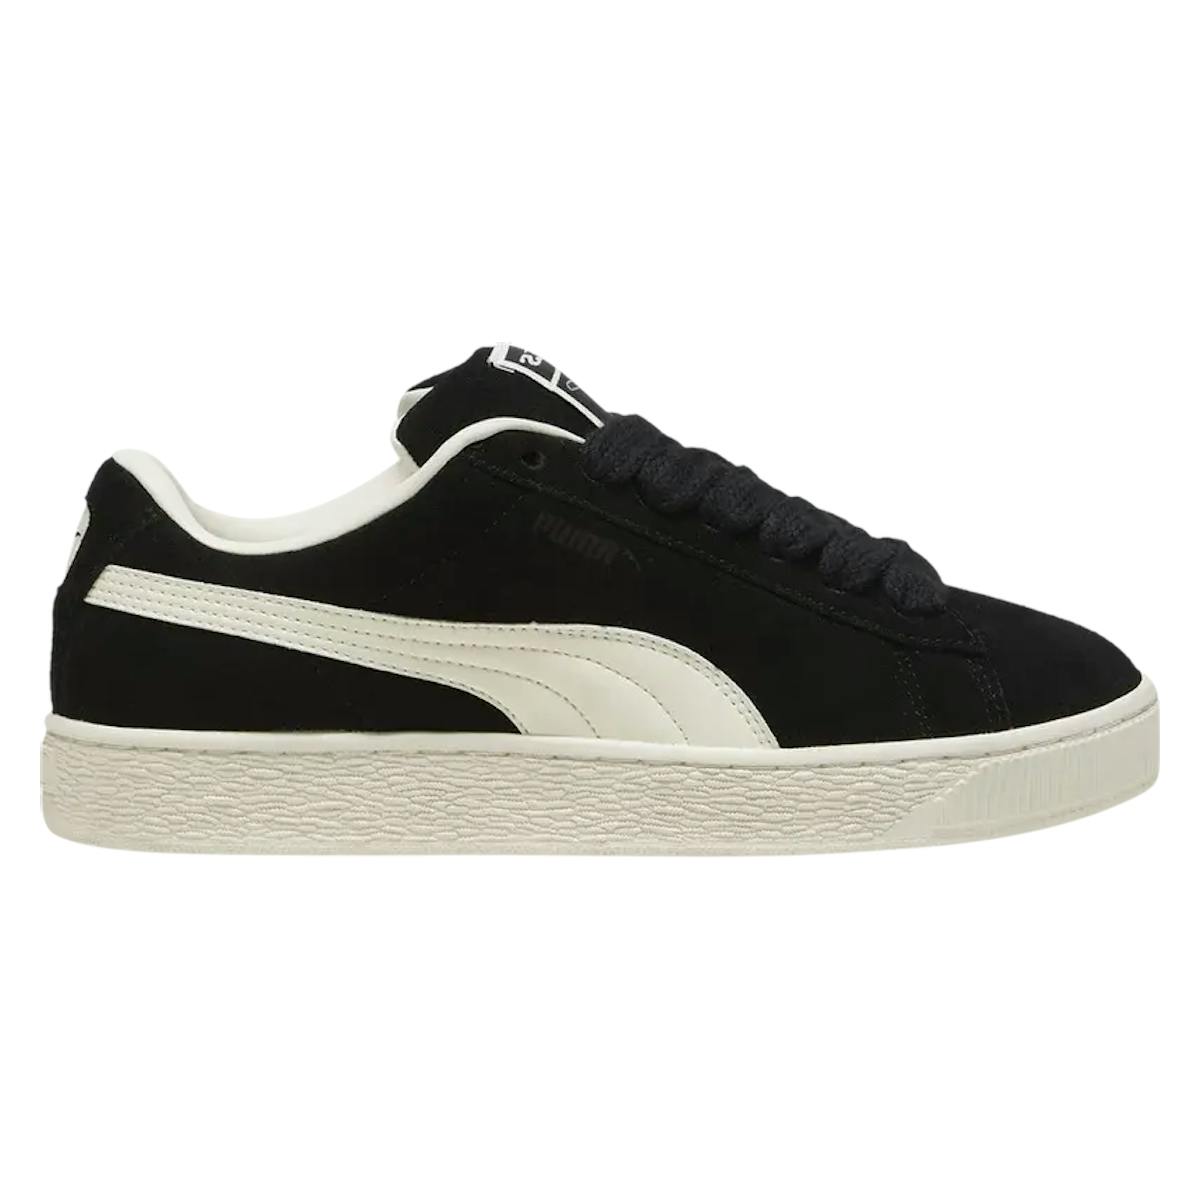 Pleasures x Puma Suede XL "Black Frosted Ivory"